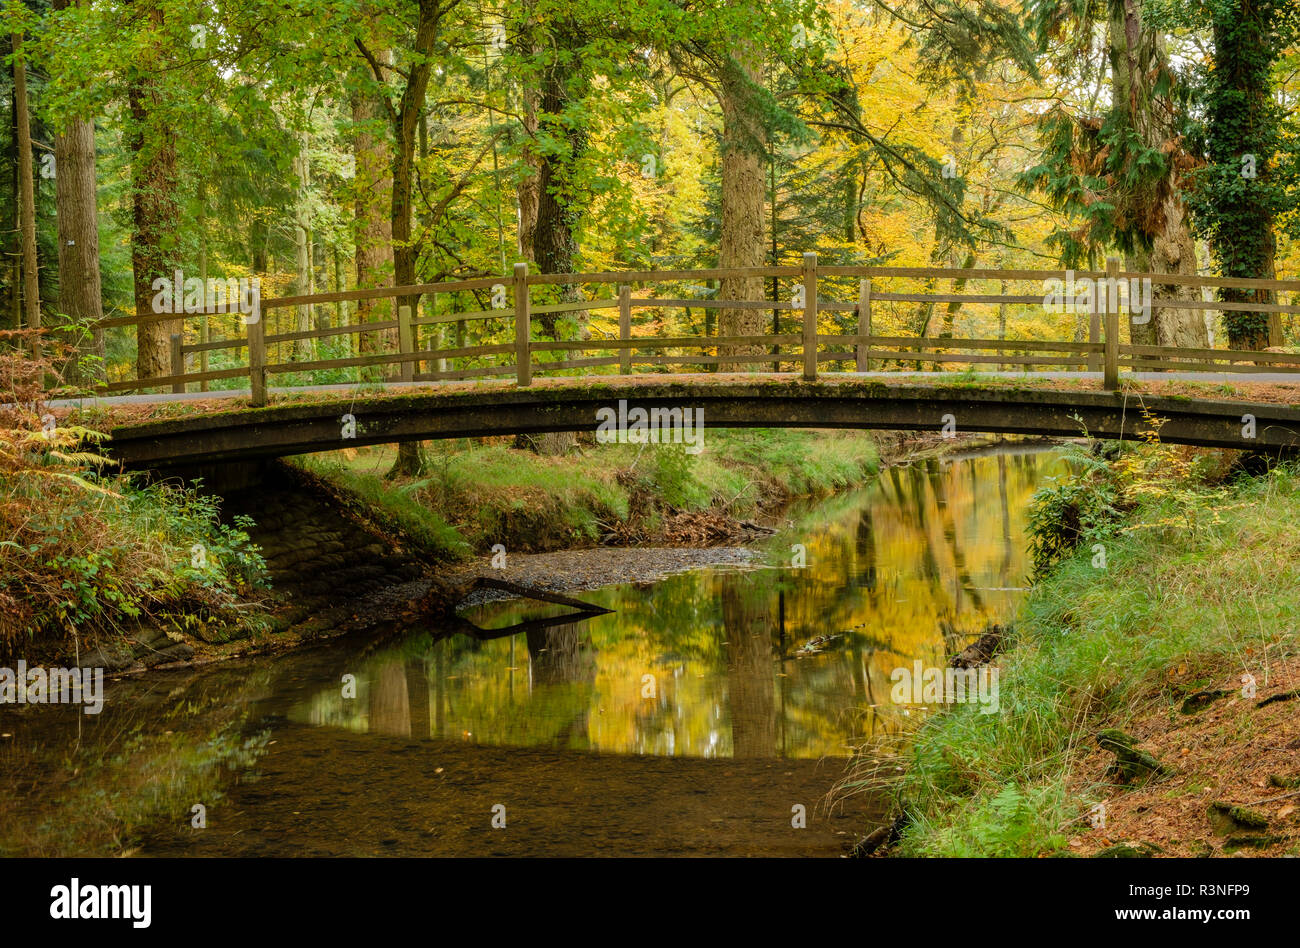 Road Bridge over the Black Water River in Autumn, New Forest National Park, Hampshire, England, UK, Stock Photo